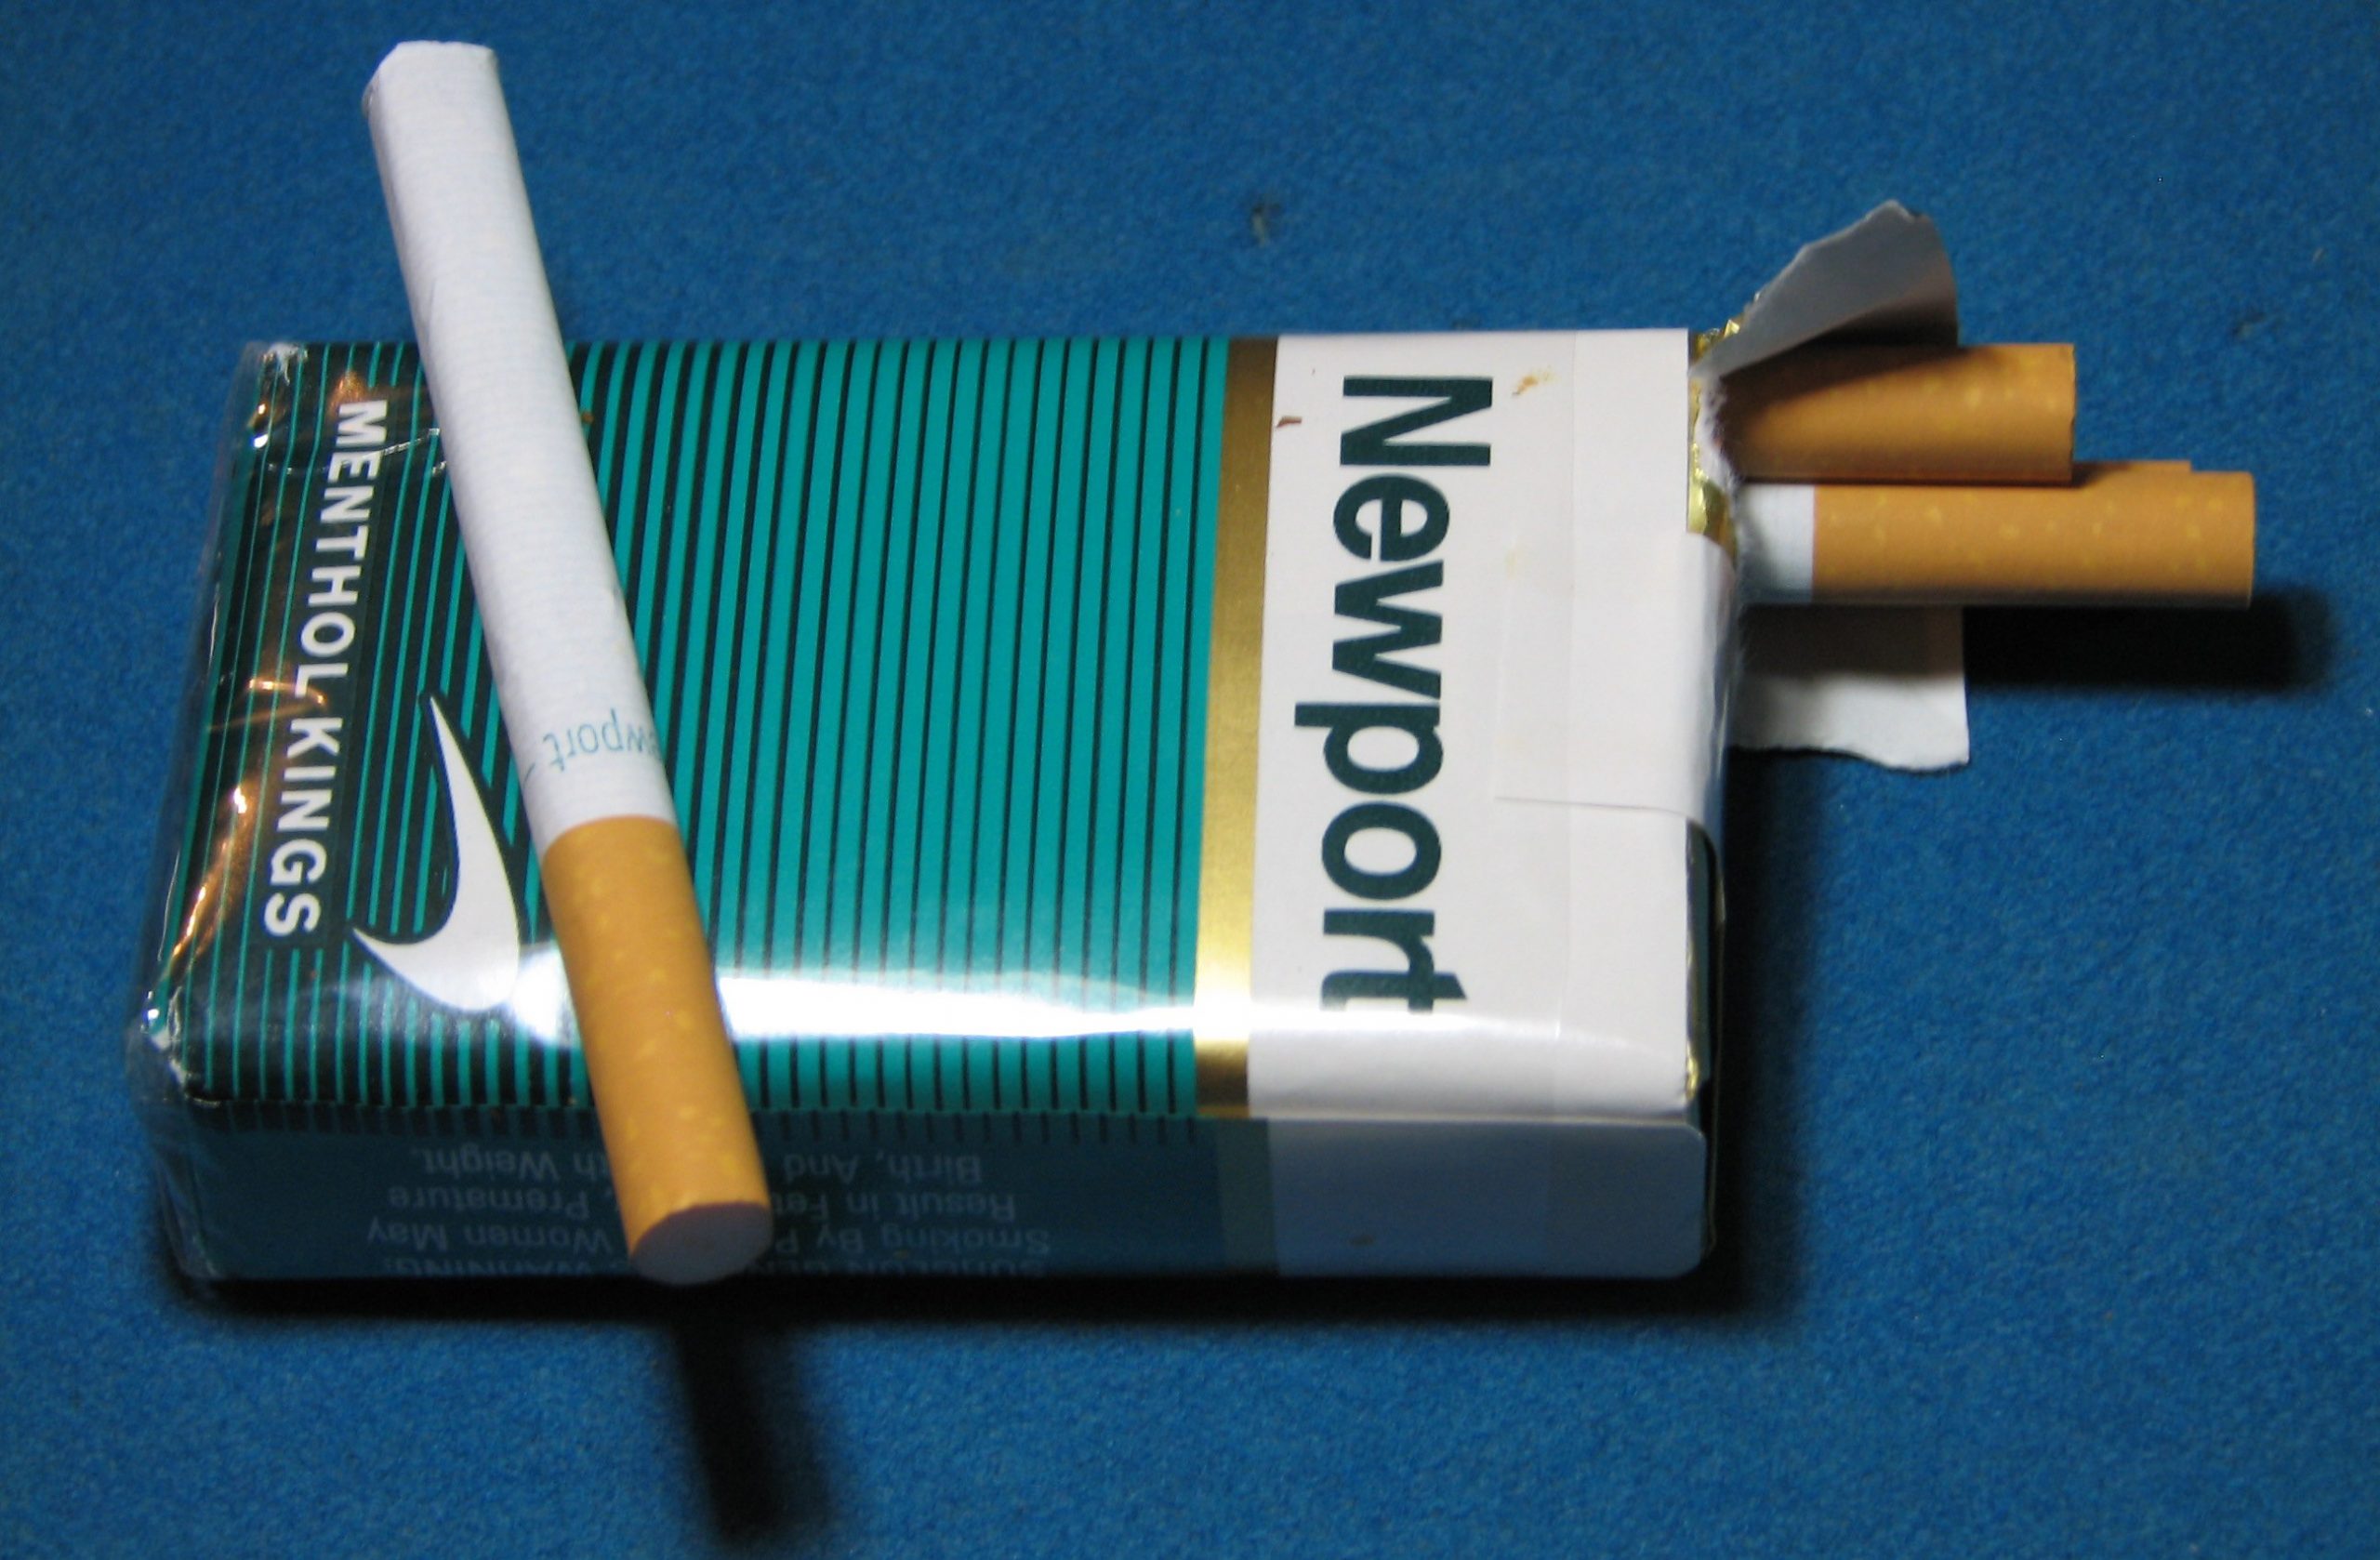 opened cigarette pack with Newport logo. one loose cigarette.